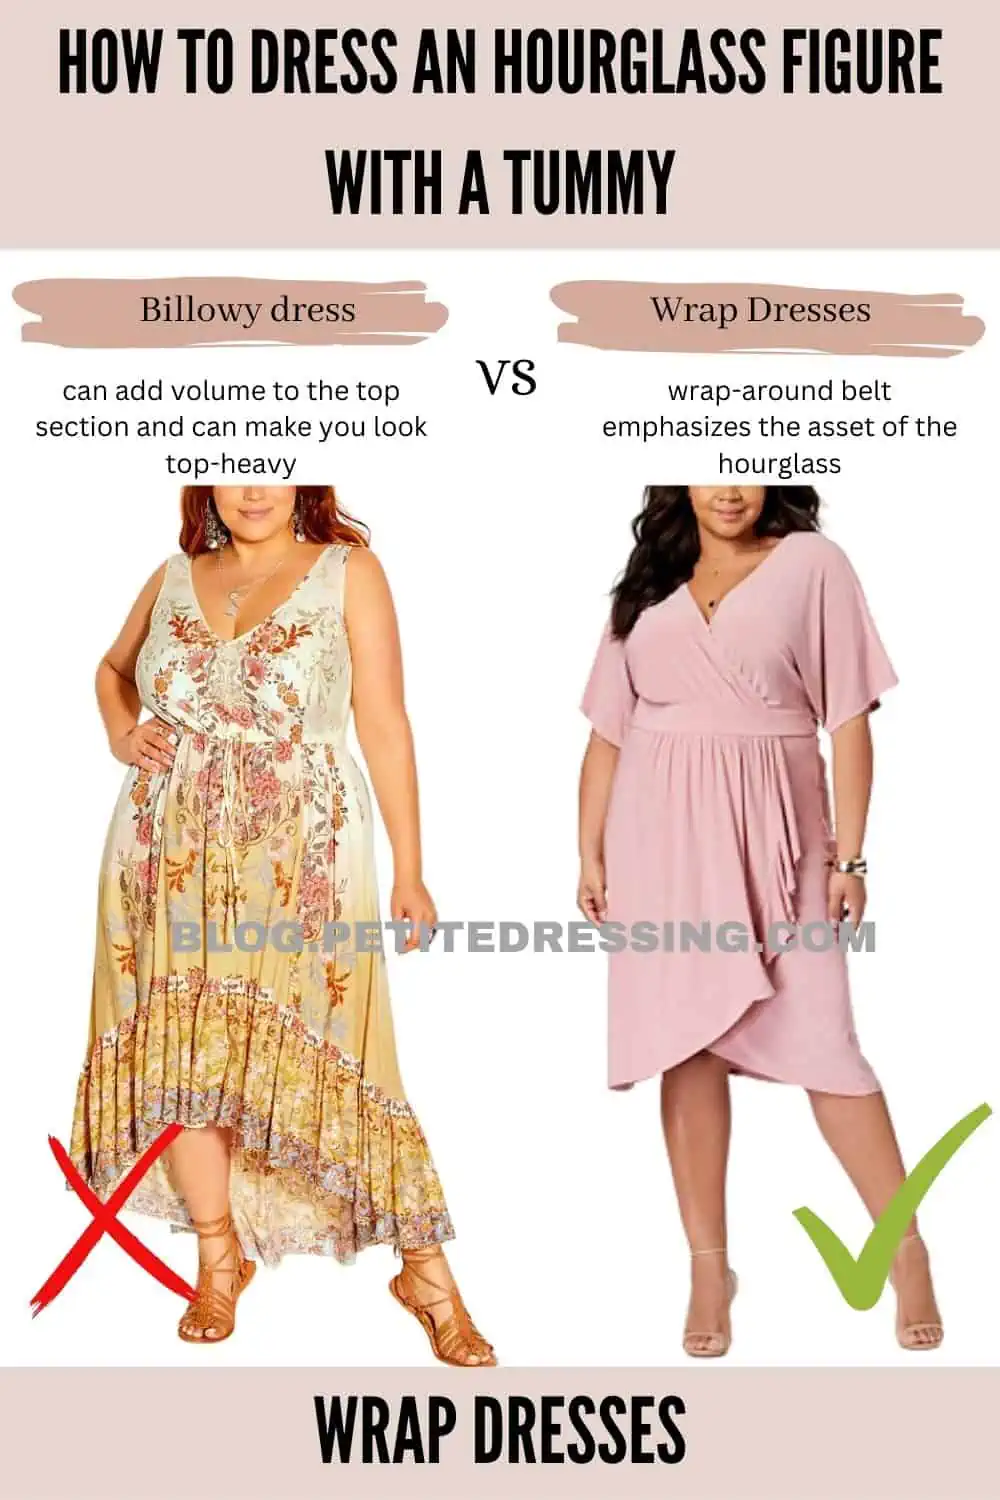 How to dress an hourglass figure with a big tummy - Quora